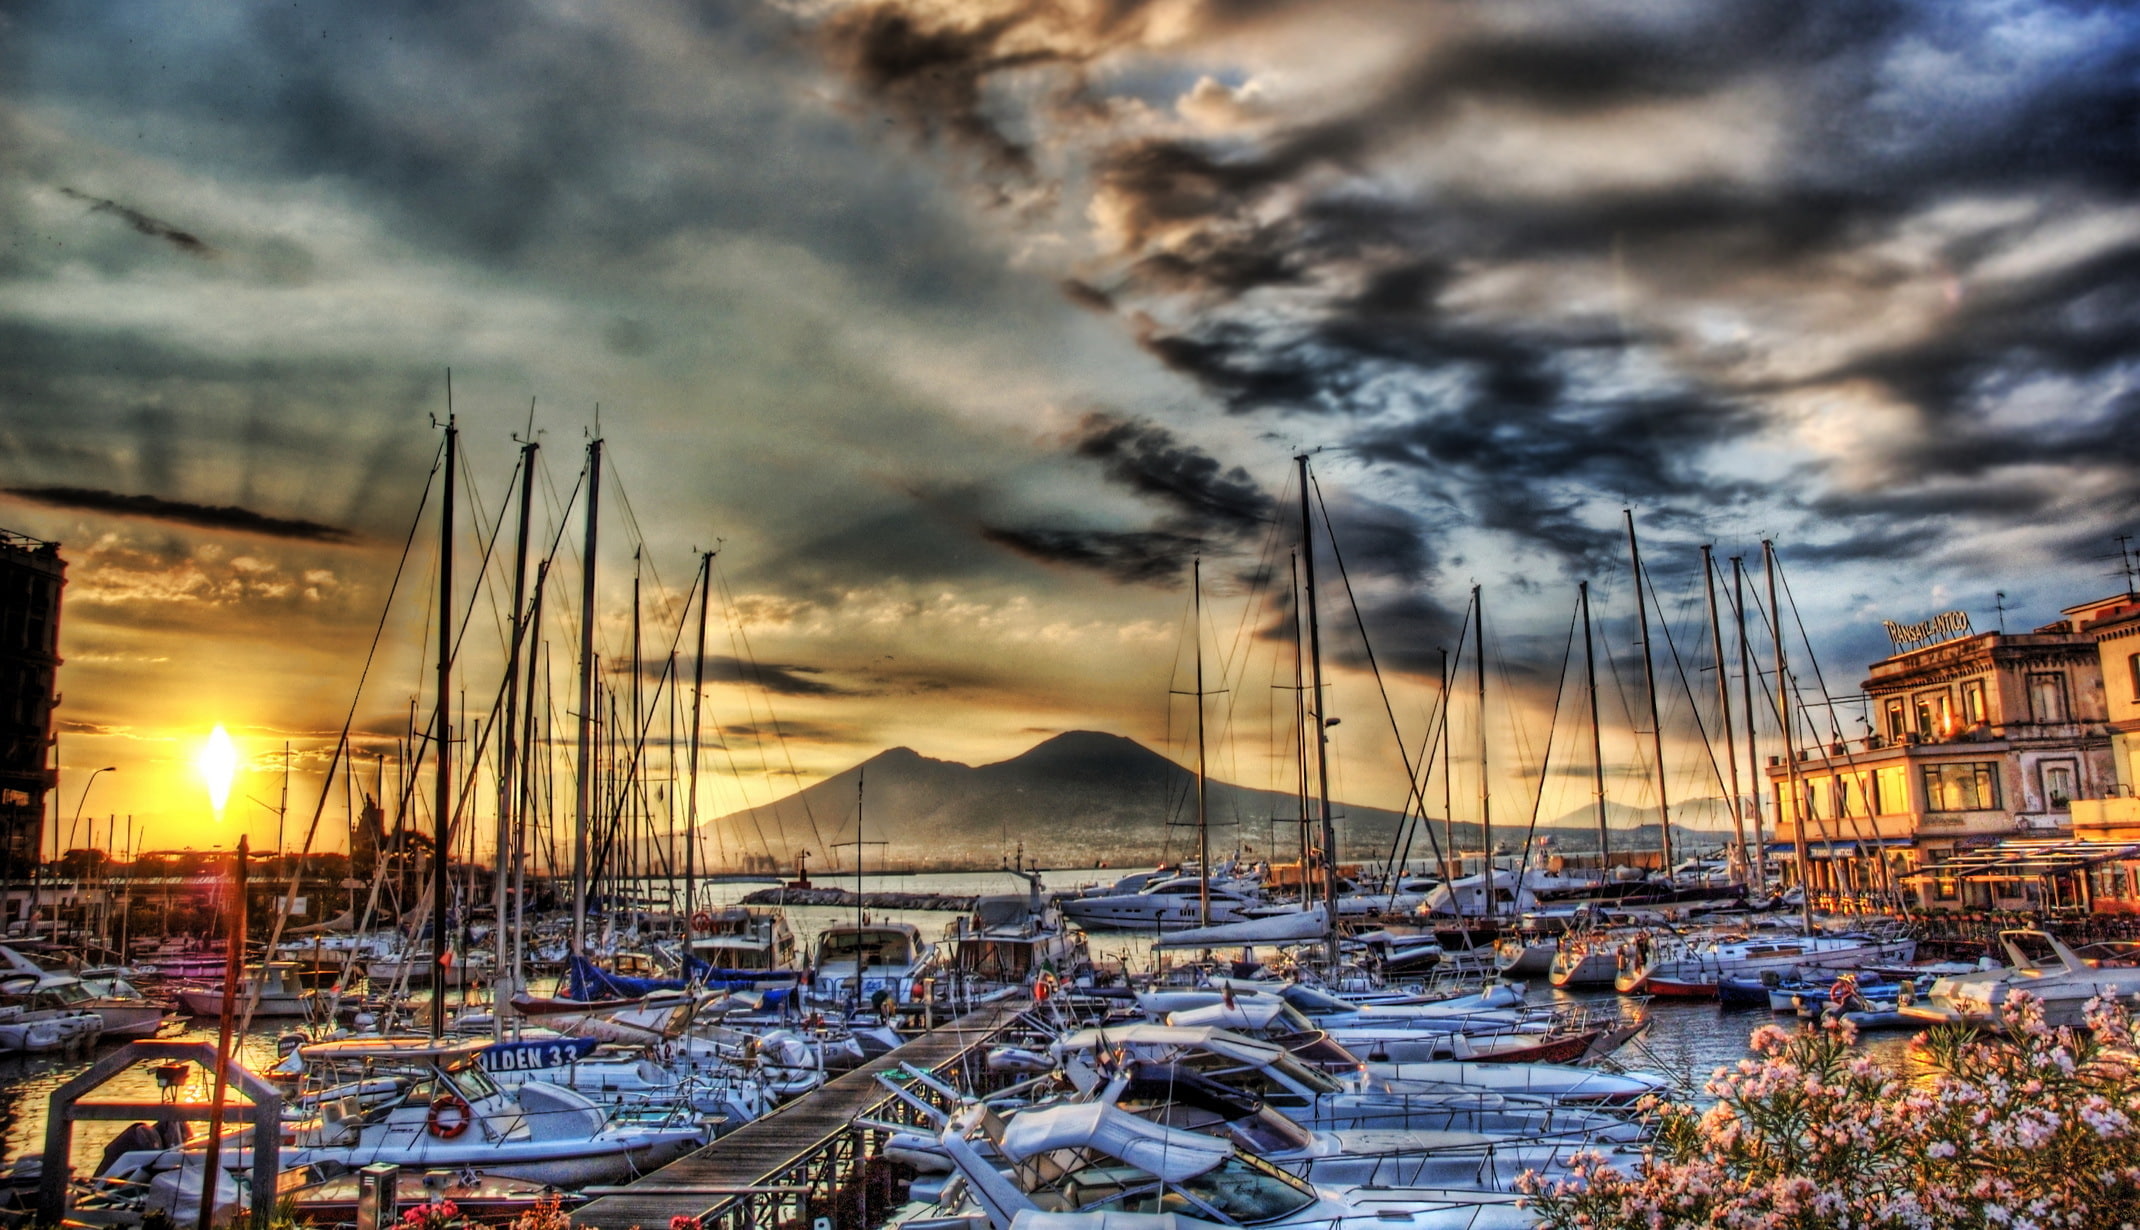 sea, mountains, photo, HDR, ships, yachts, pier, Italy, pierce